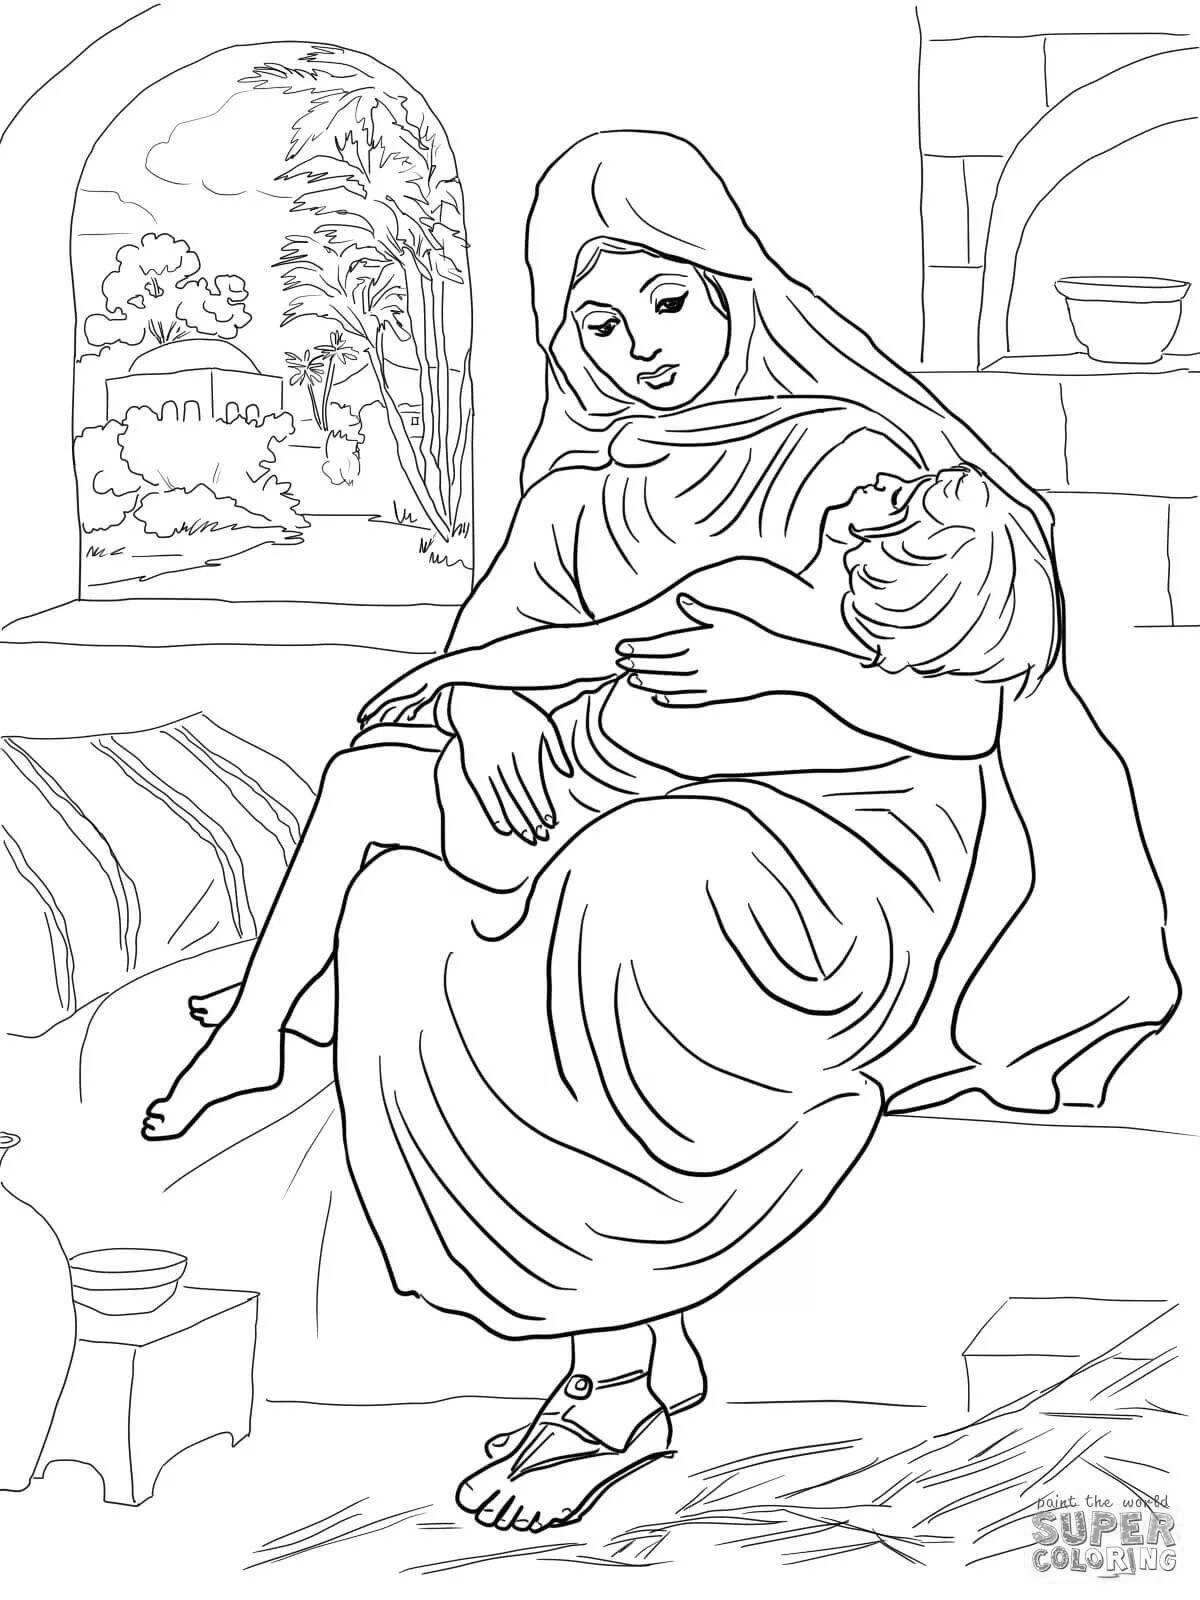 Gorgeous elise coloring book